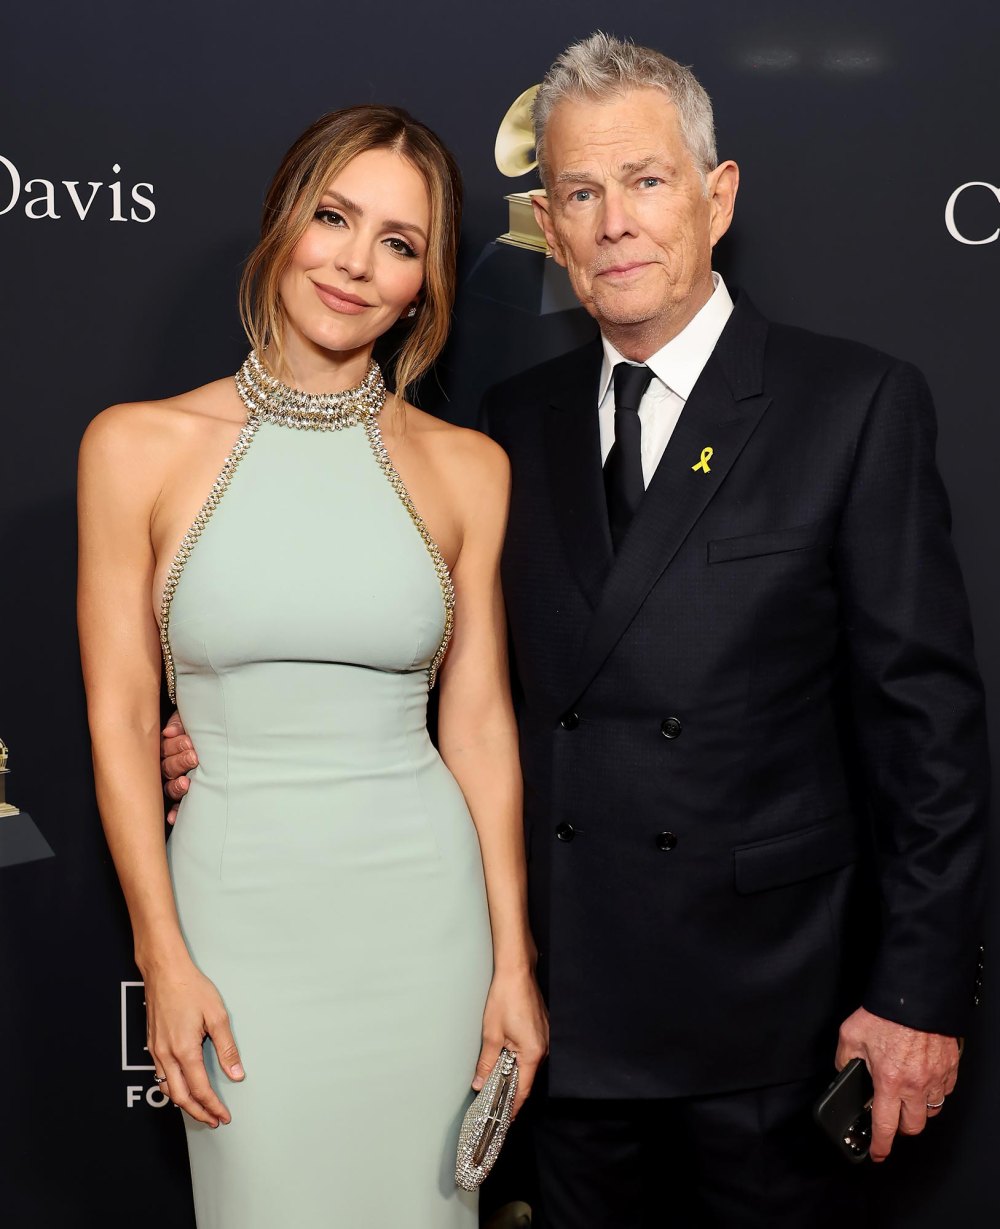 Katharine McPhee and David Foster’s 3-Year-Old Son Plays Drums Onstage During Their Performance